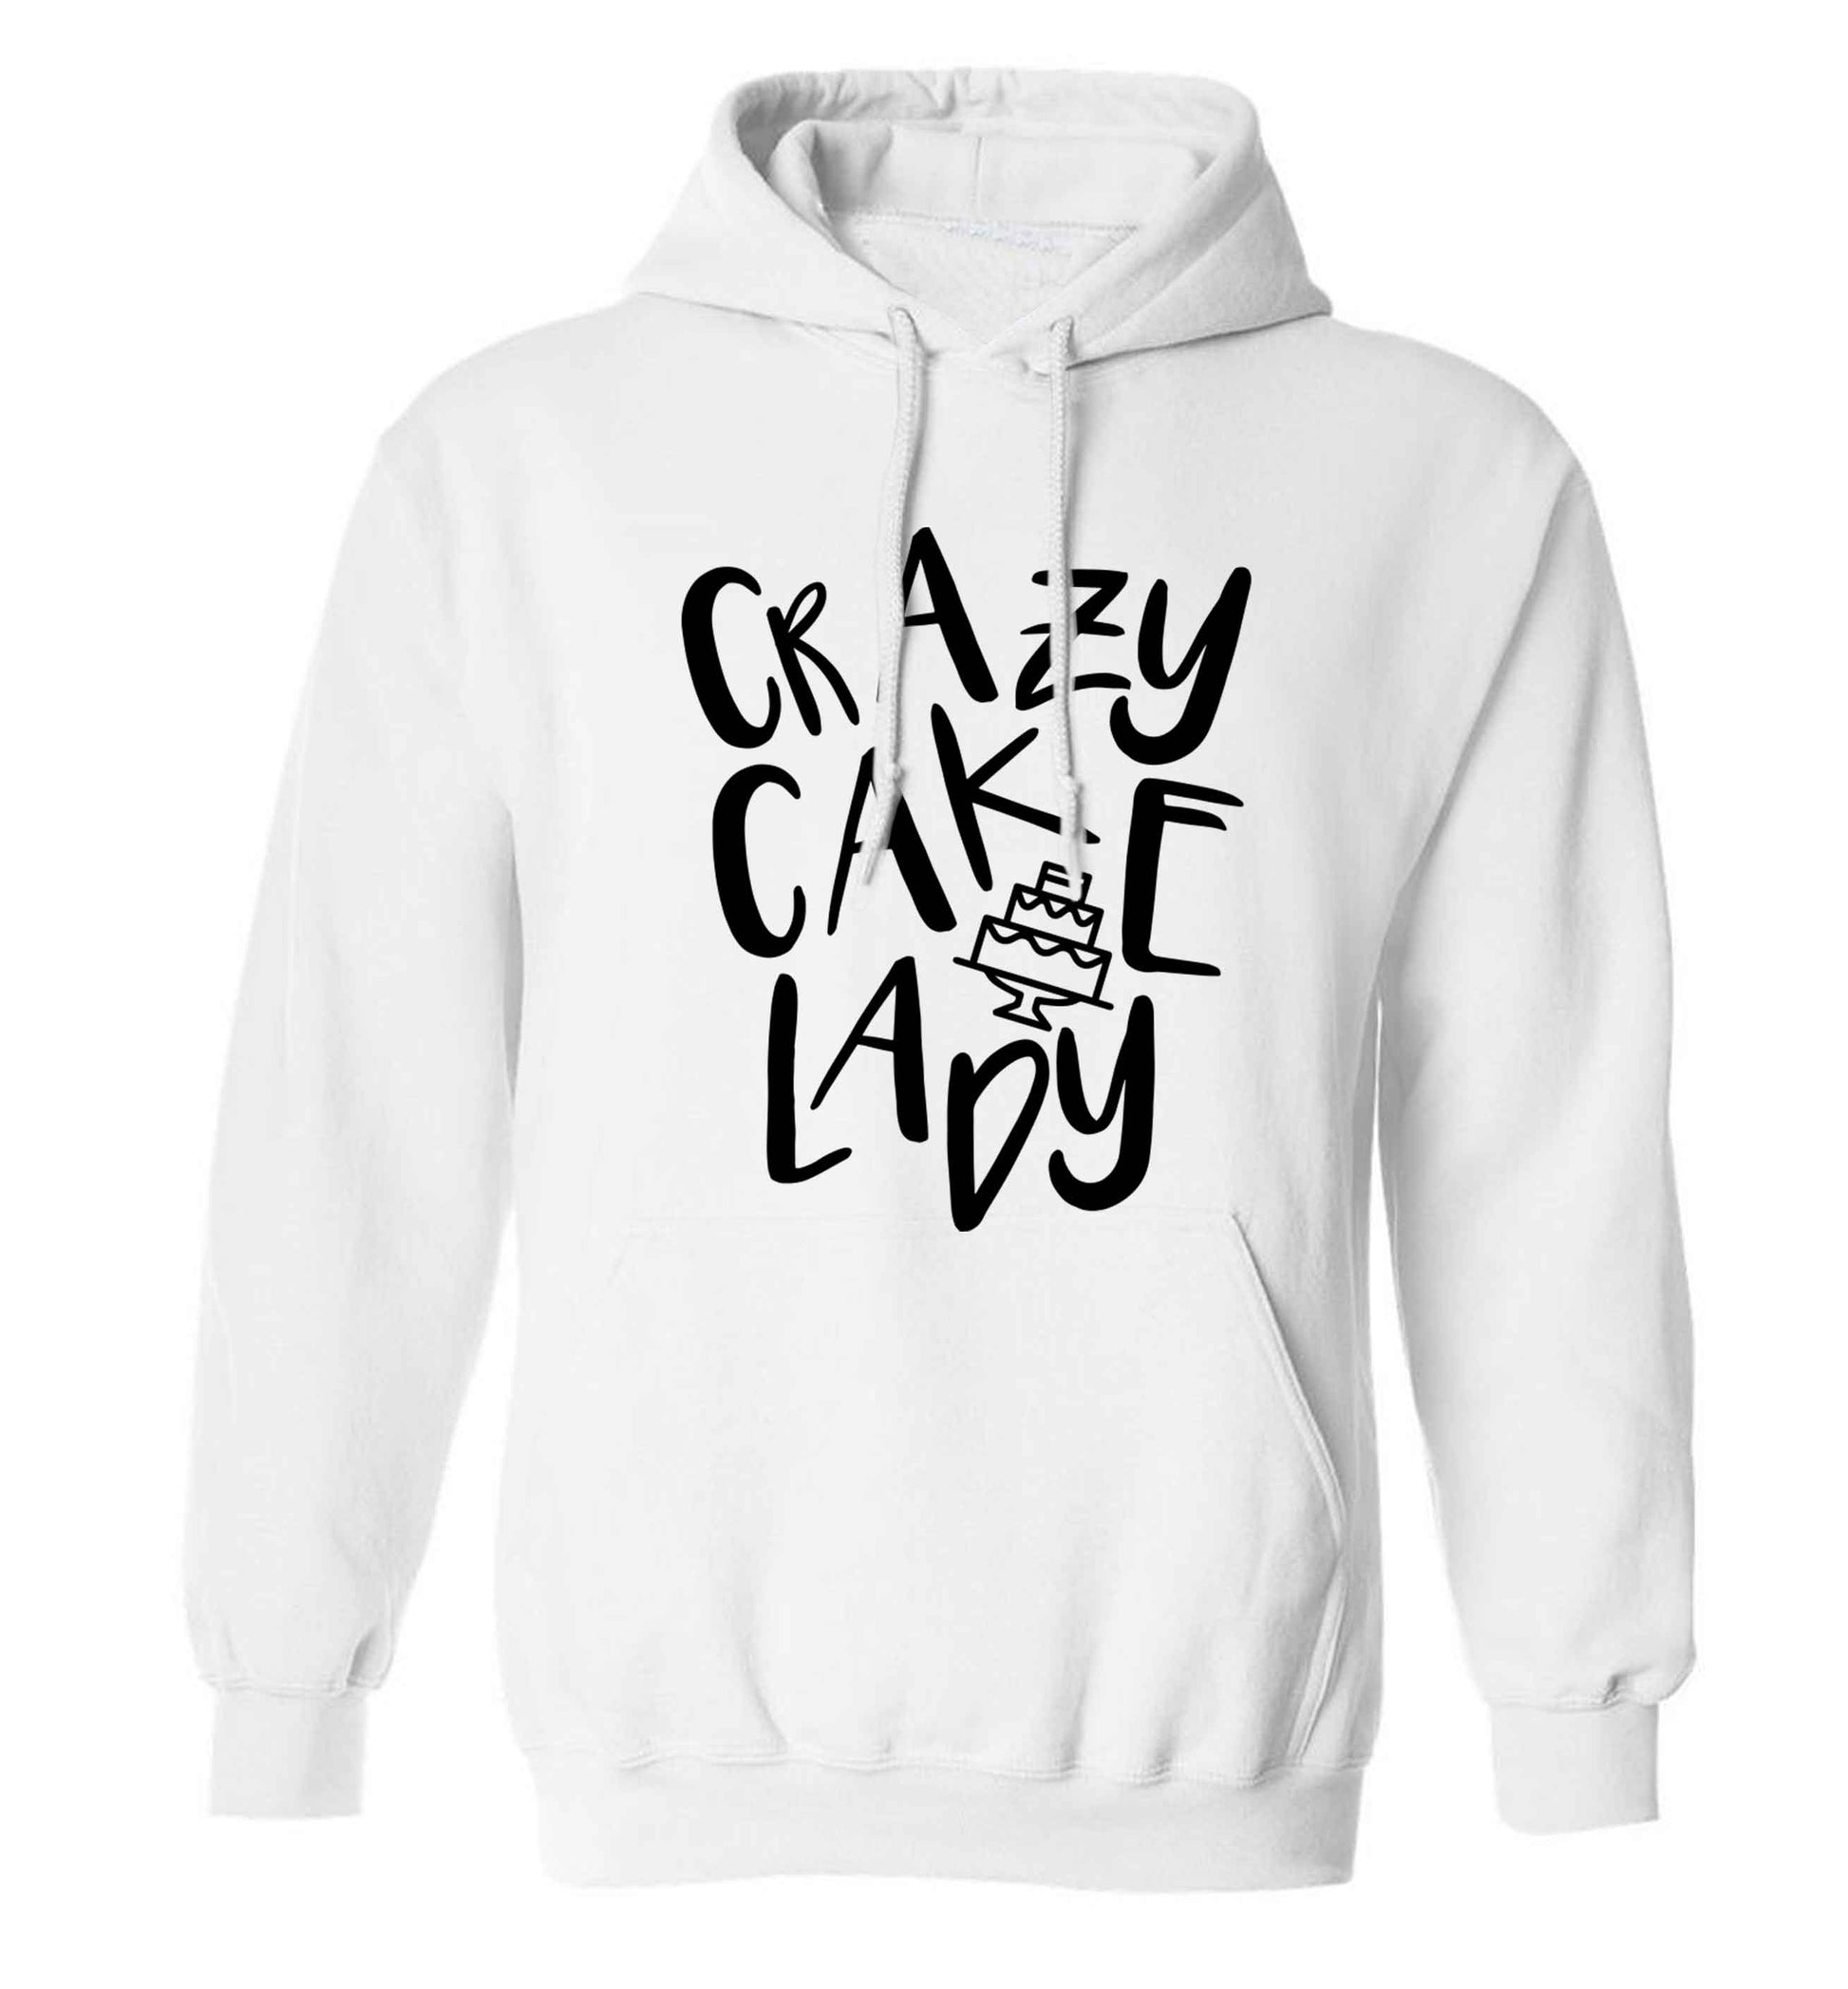 Crazy cake lady adults unisex white hoodie 2XL